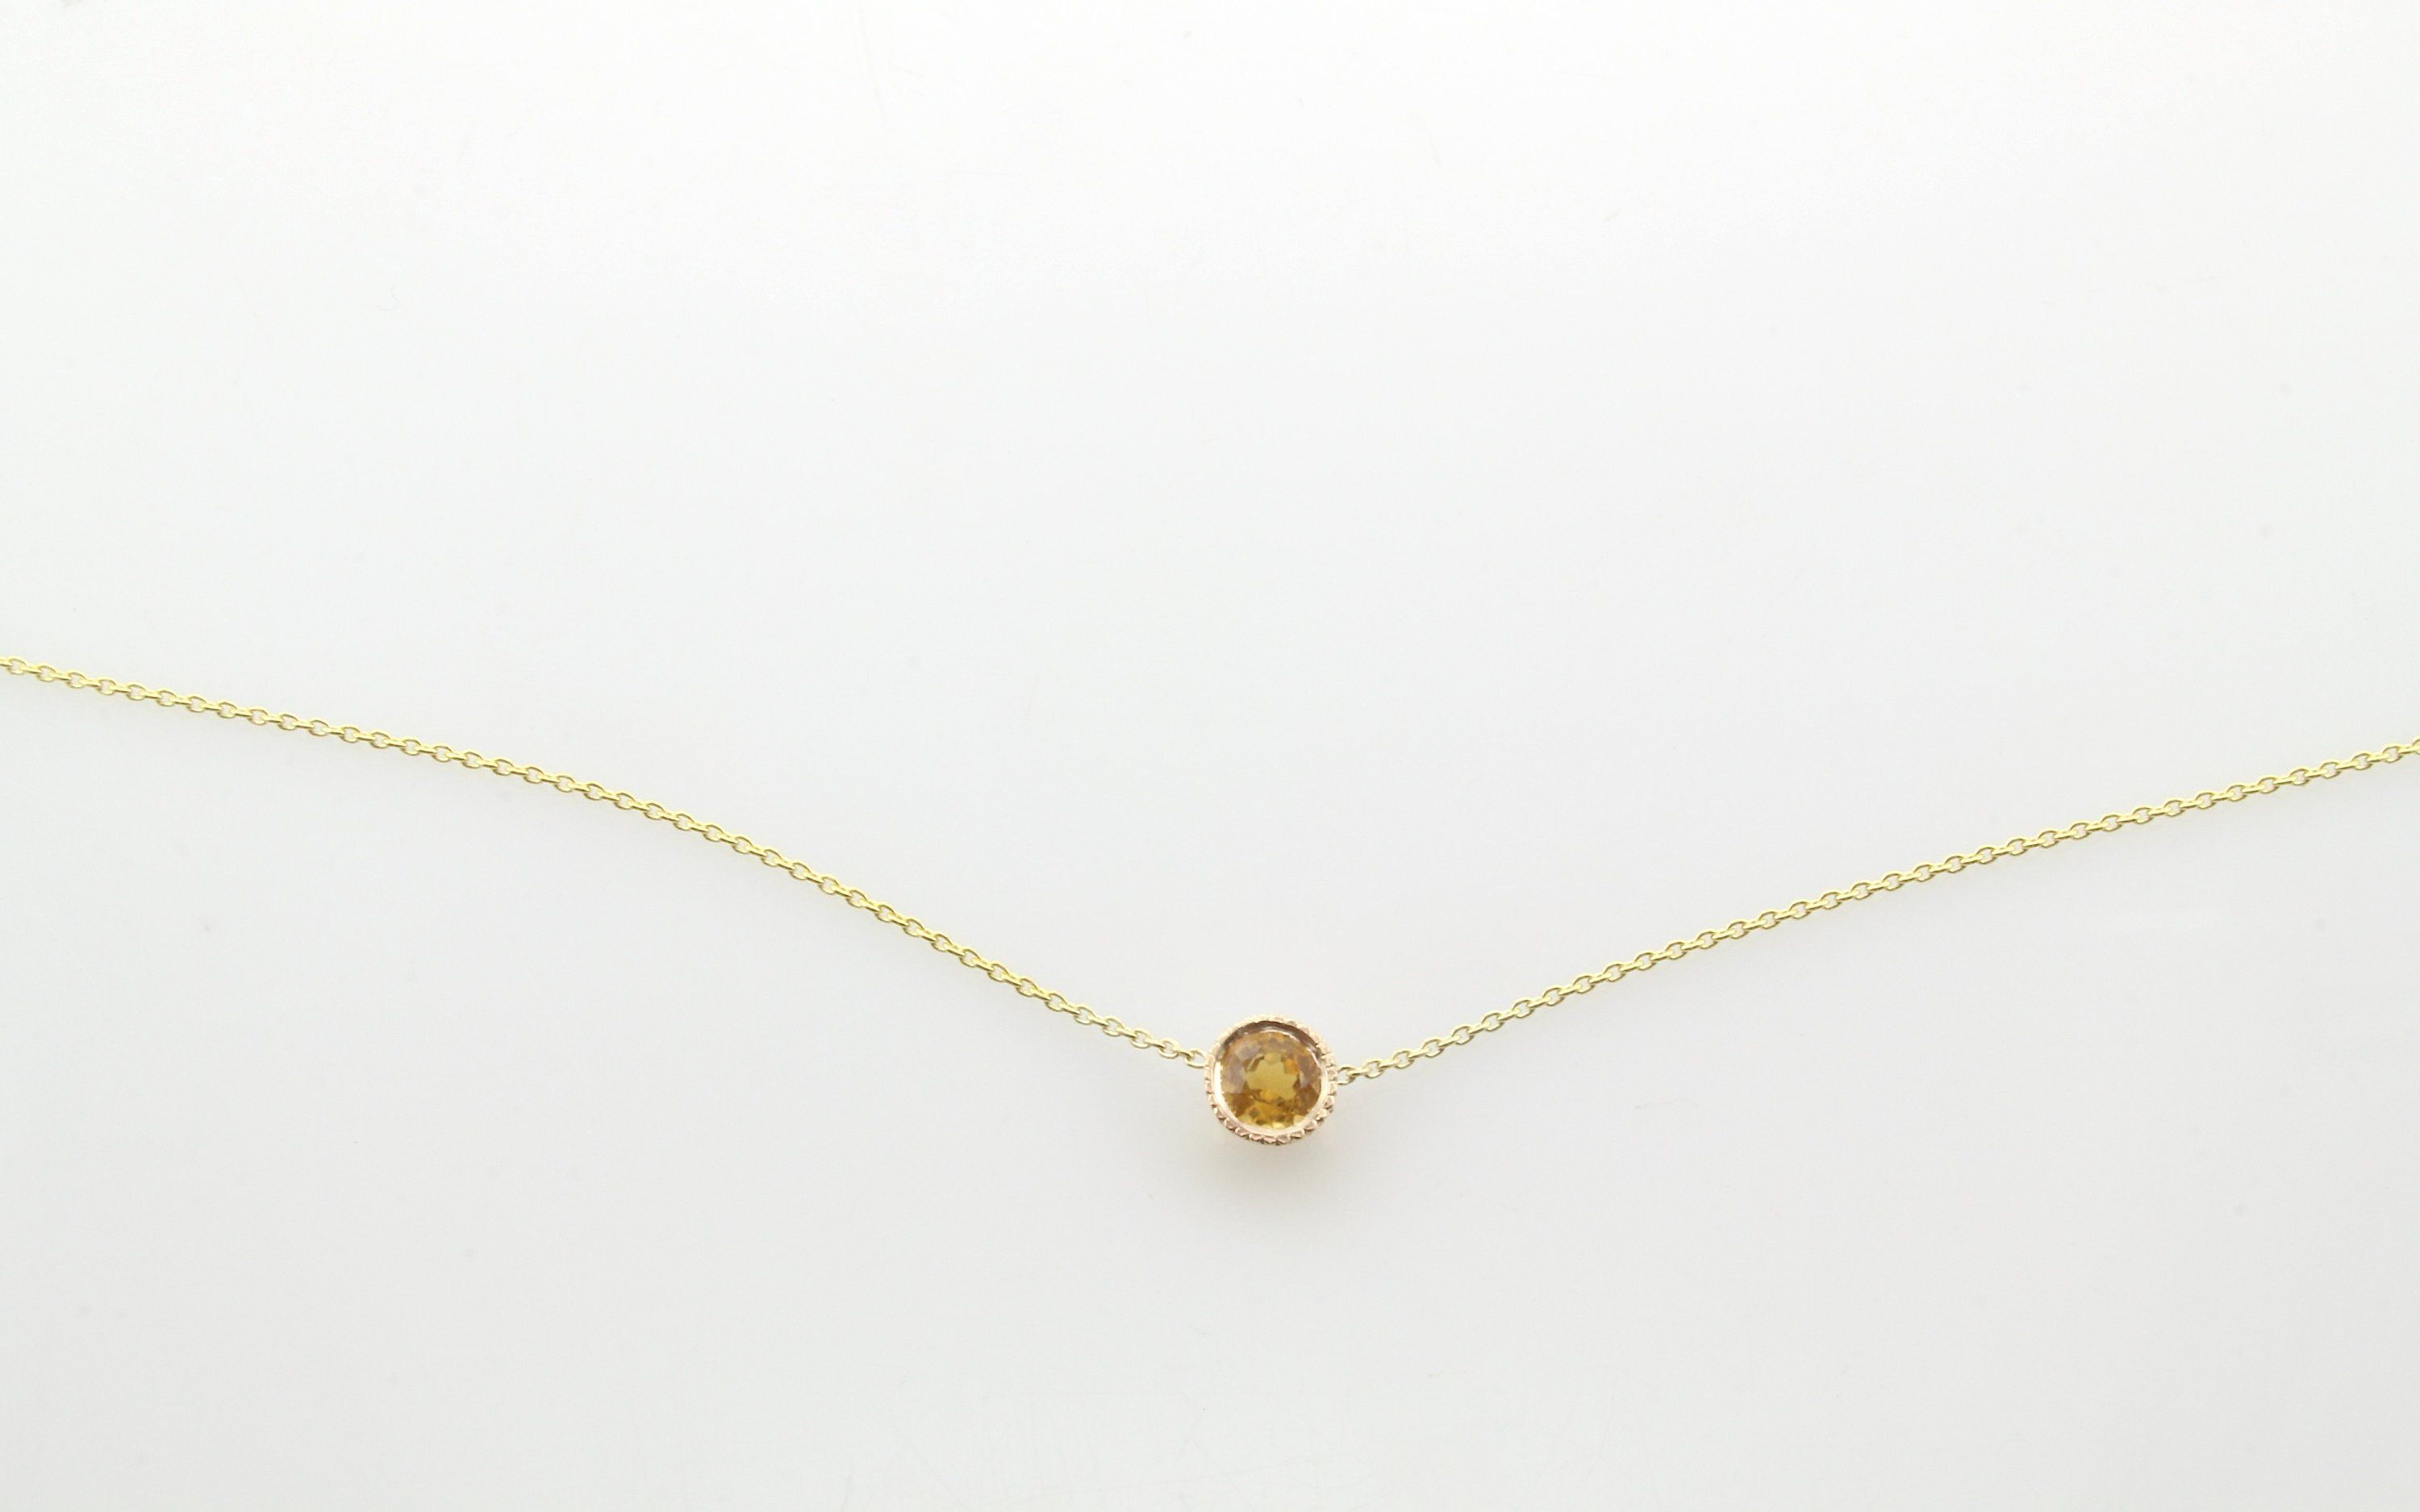 Citrine Pendant Necklace, Citrine Necklace November, Personalized  Birthstone Necklace, 14k Solid Gold, Graduation Gift, Birthday Gift Pertaining To Most Up To Date November Droplet Pendant Necklaces (View 23 of 25)